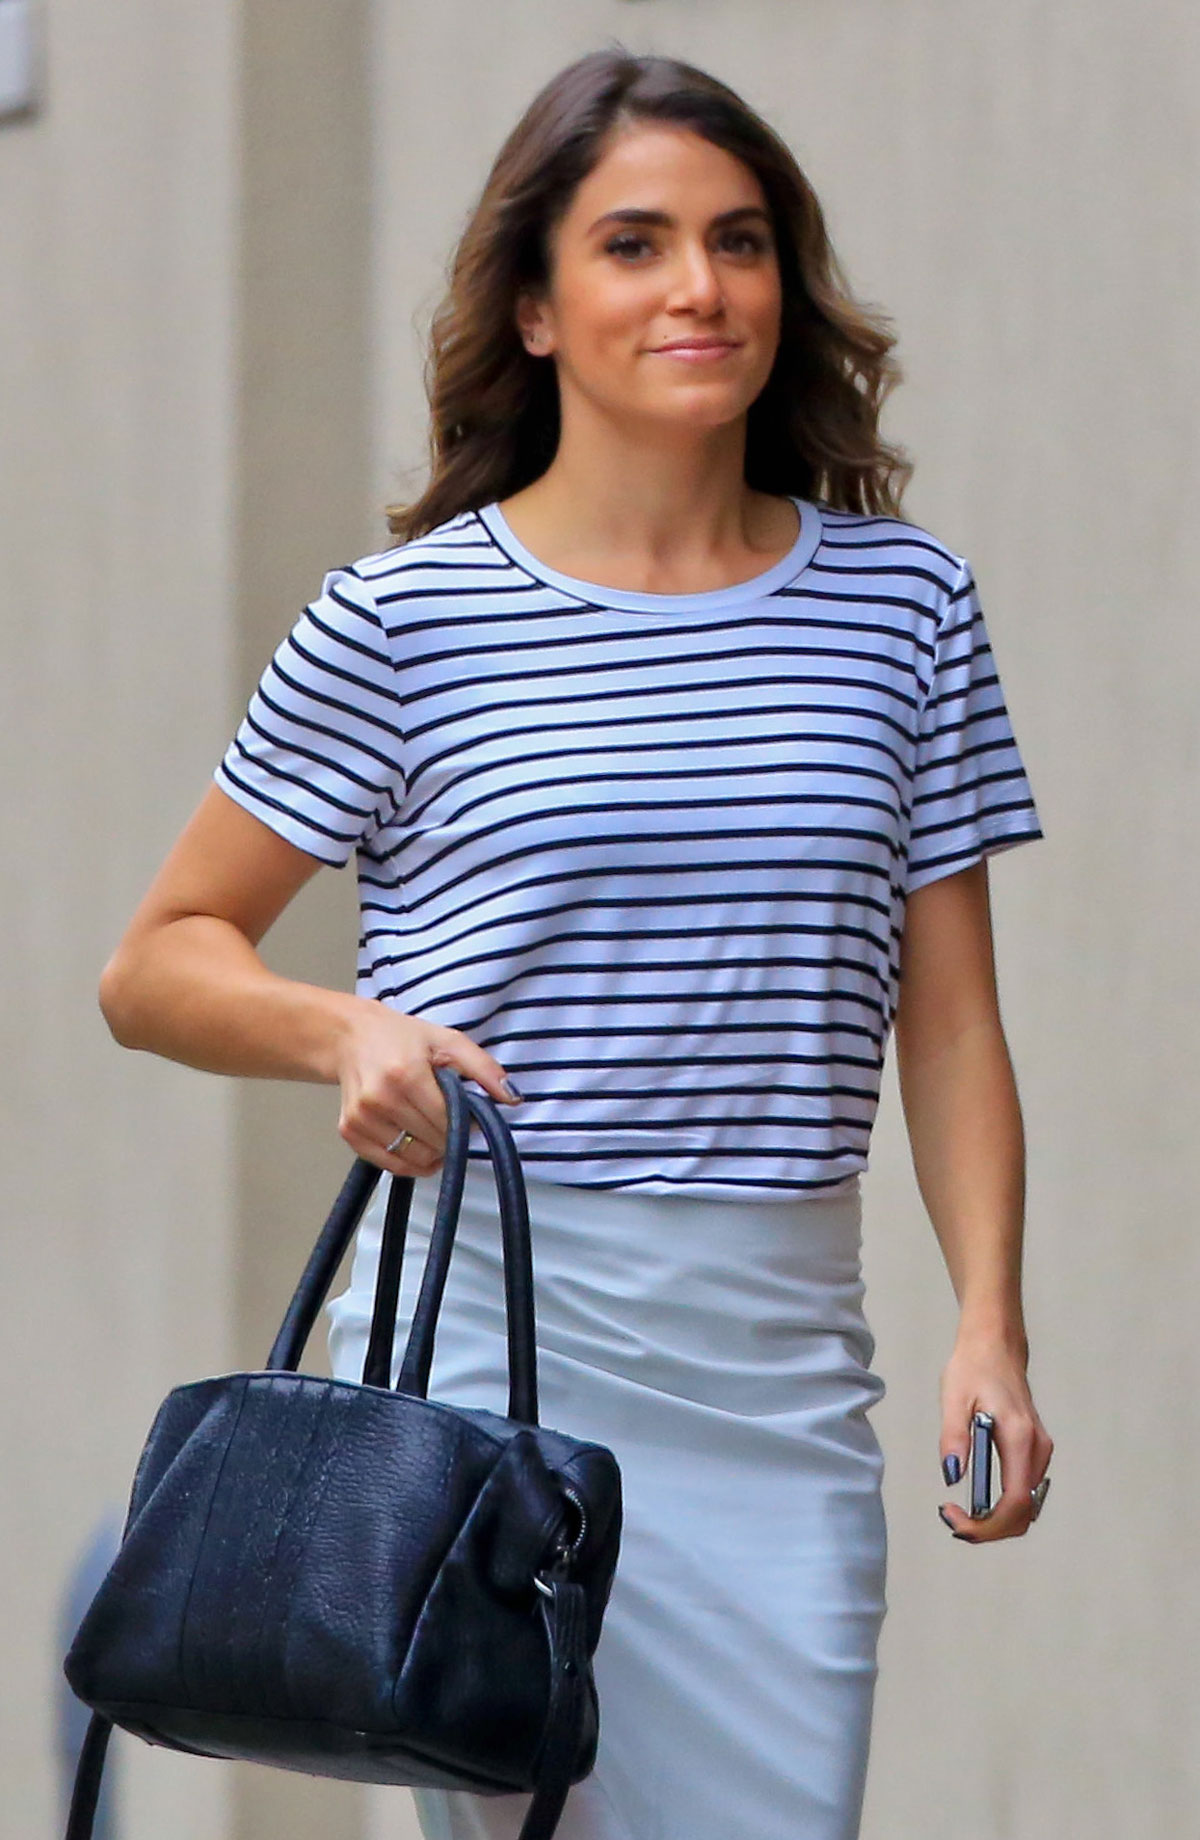 Nikki Reed out and about candids in Hollywood